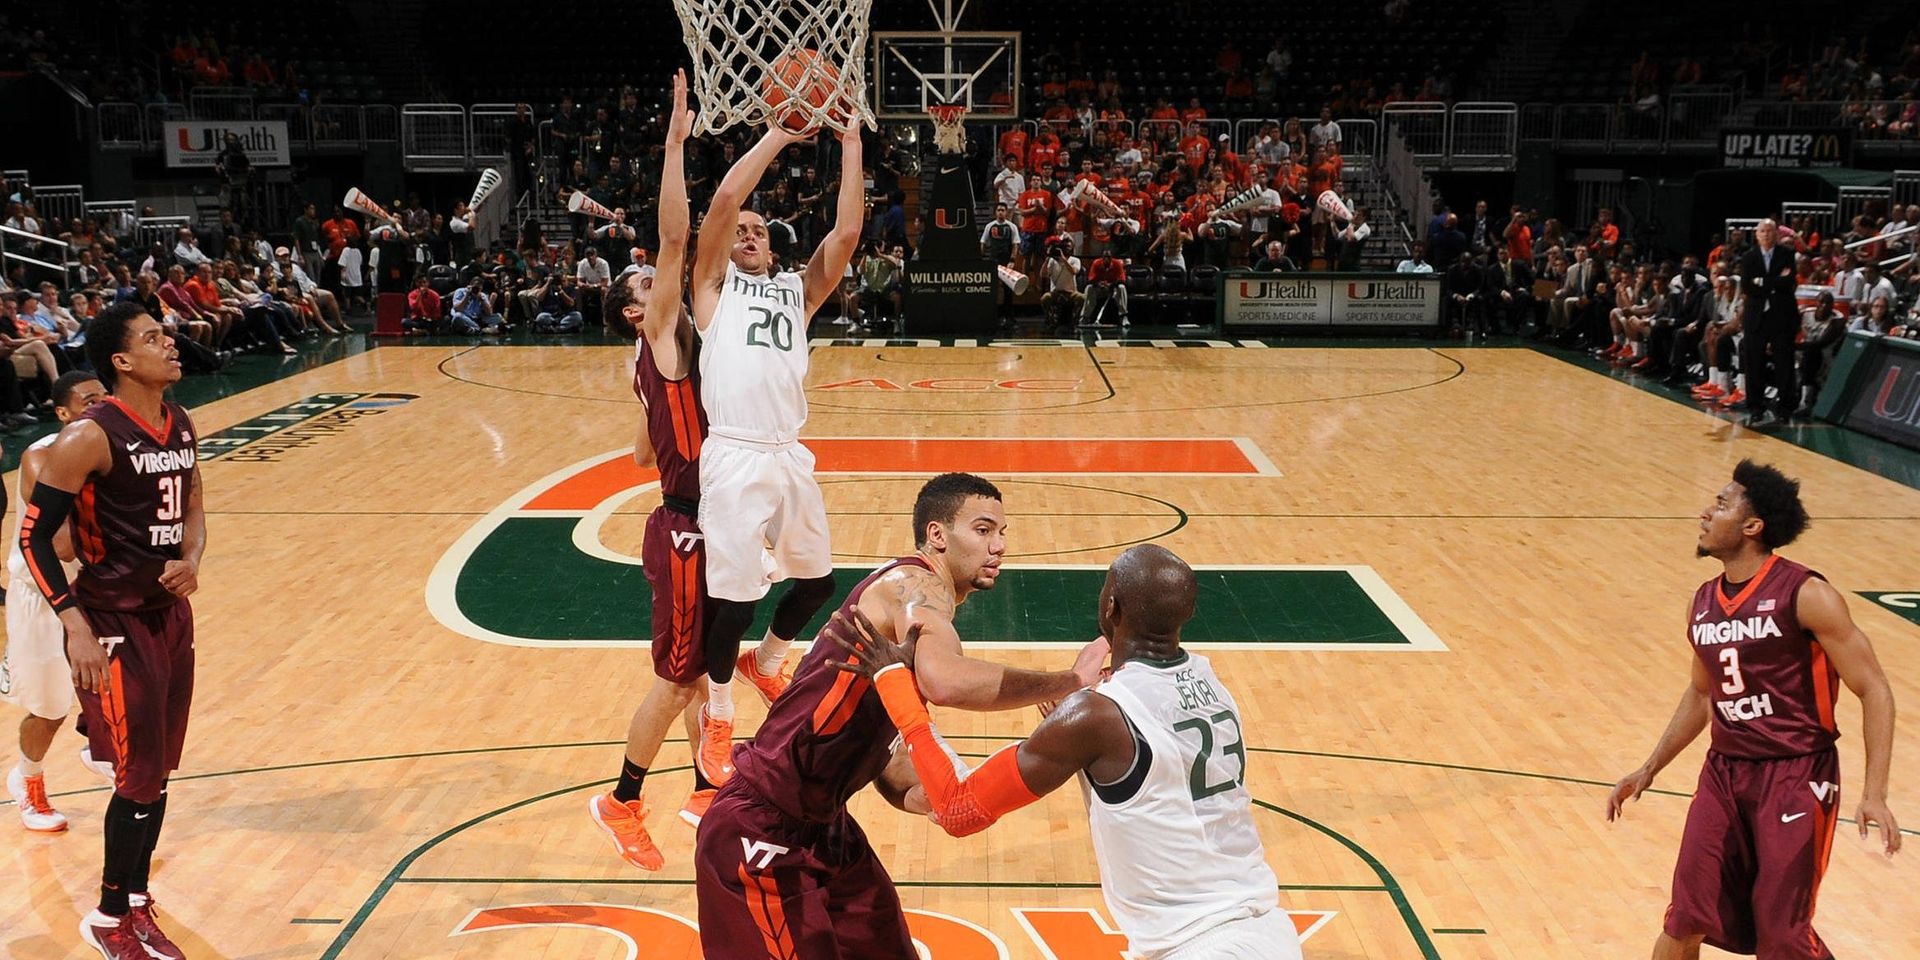 Canes Fall in ACC Opener, 61-60, in OT